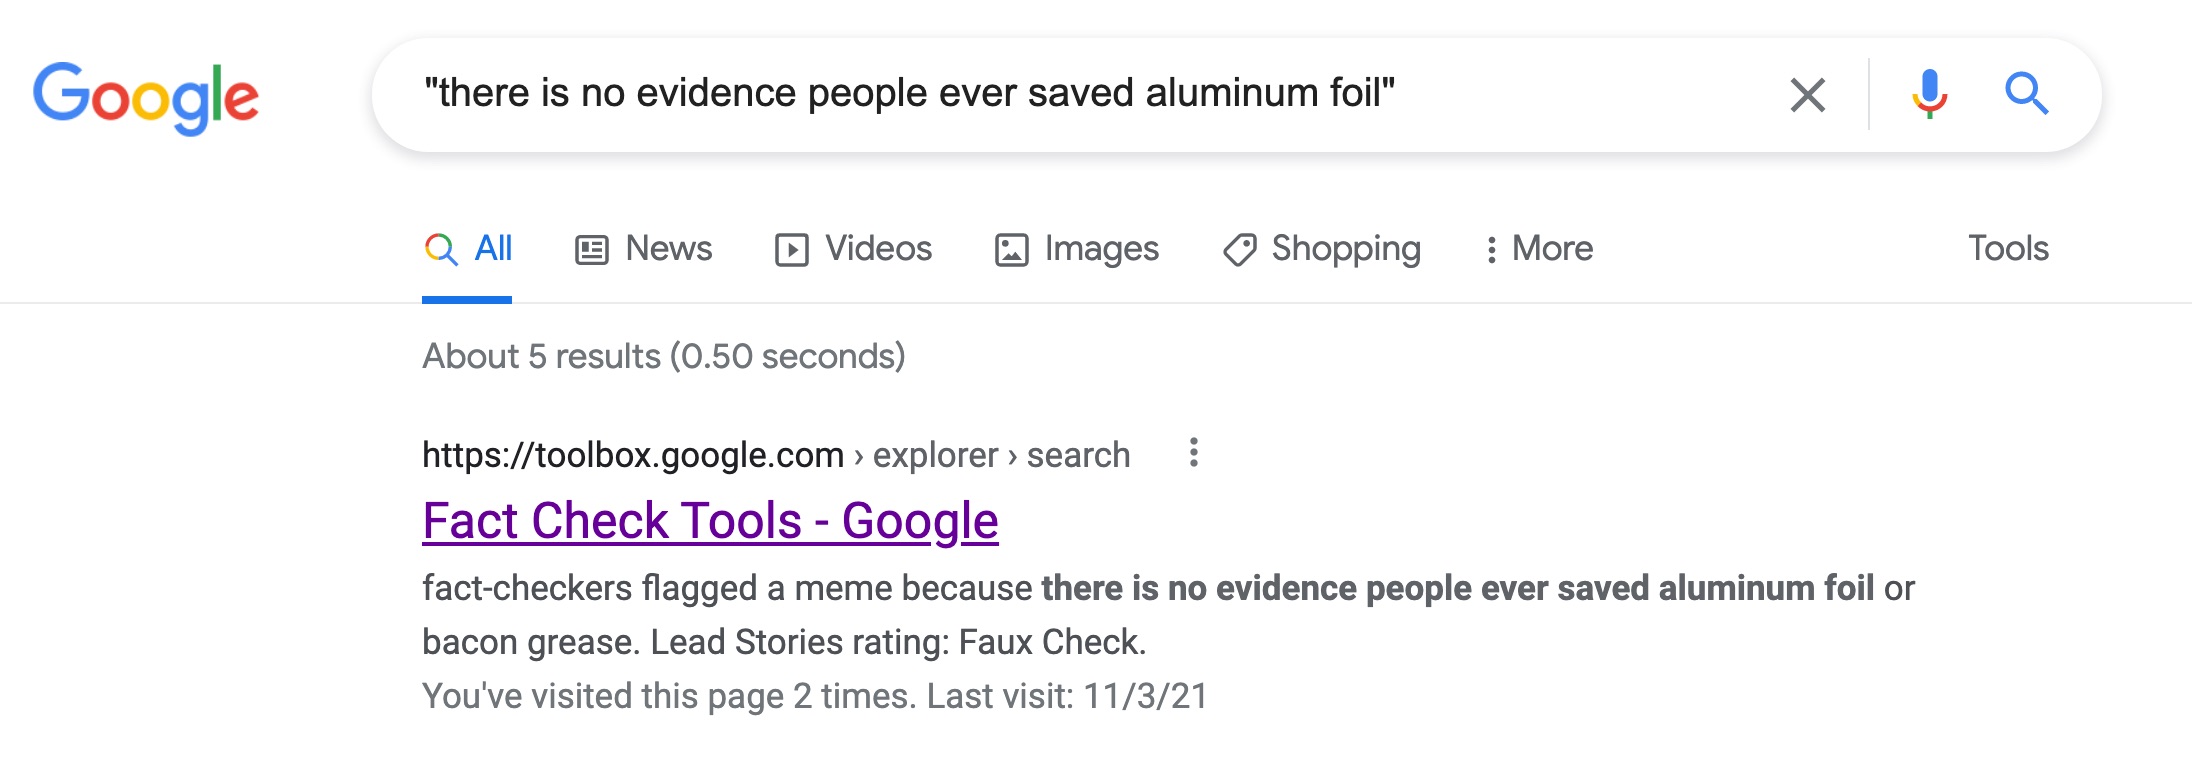 fact check no evidence people saved bacon grease aluminum foil